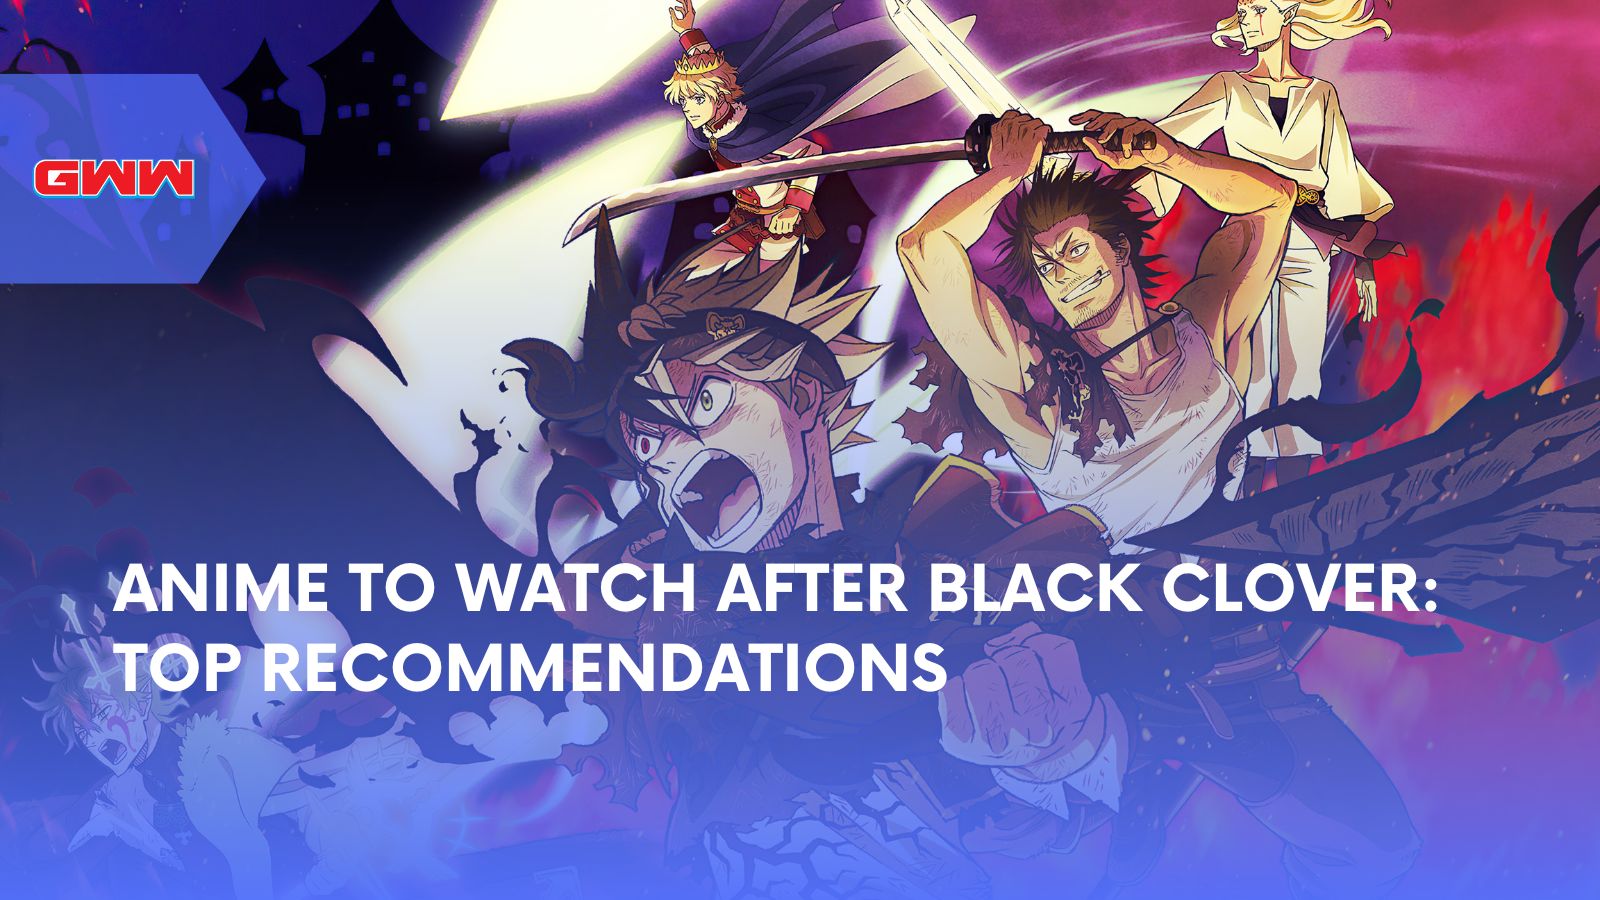 Anime to Watch After Black Clover: Top Recommendations